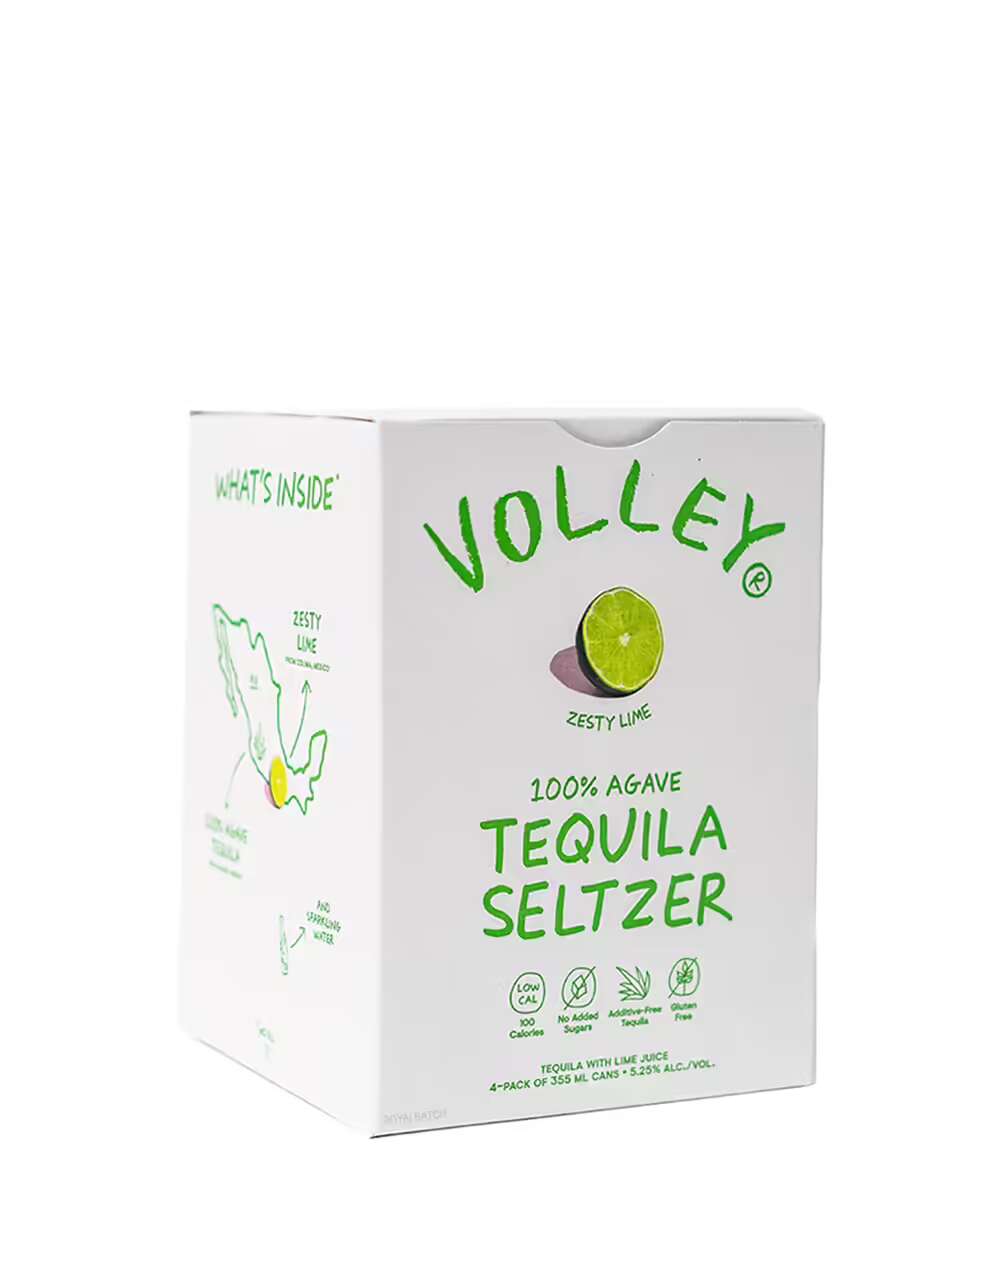 Volley Zesty lime Canned Cocktails (4 Pack) 355ml